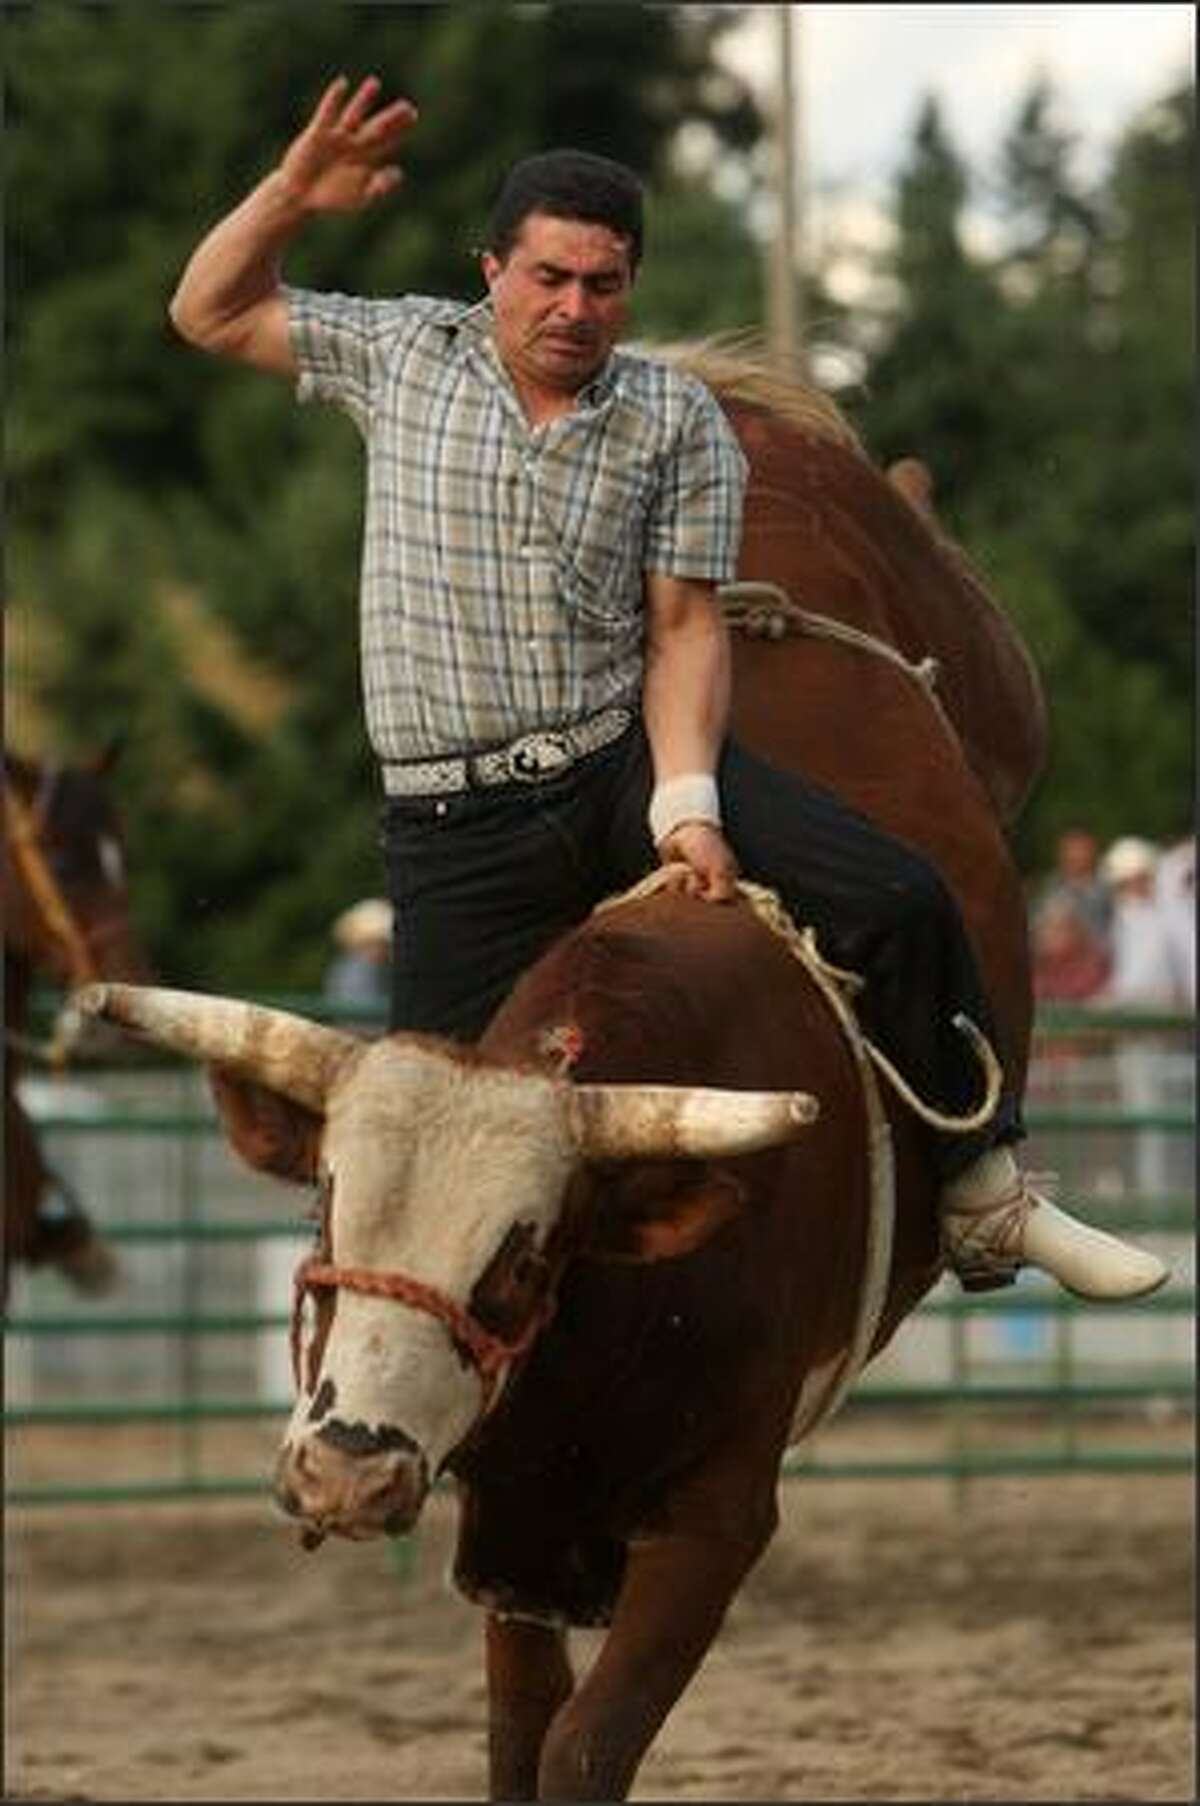 A bull rider takes his turn.